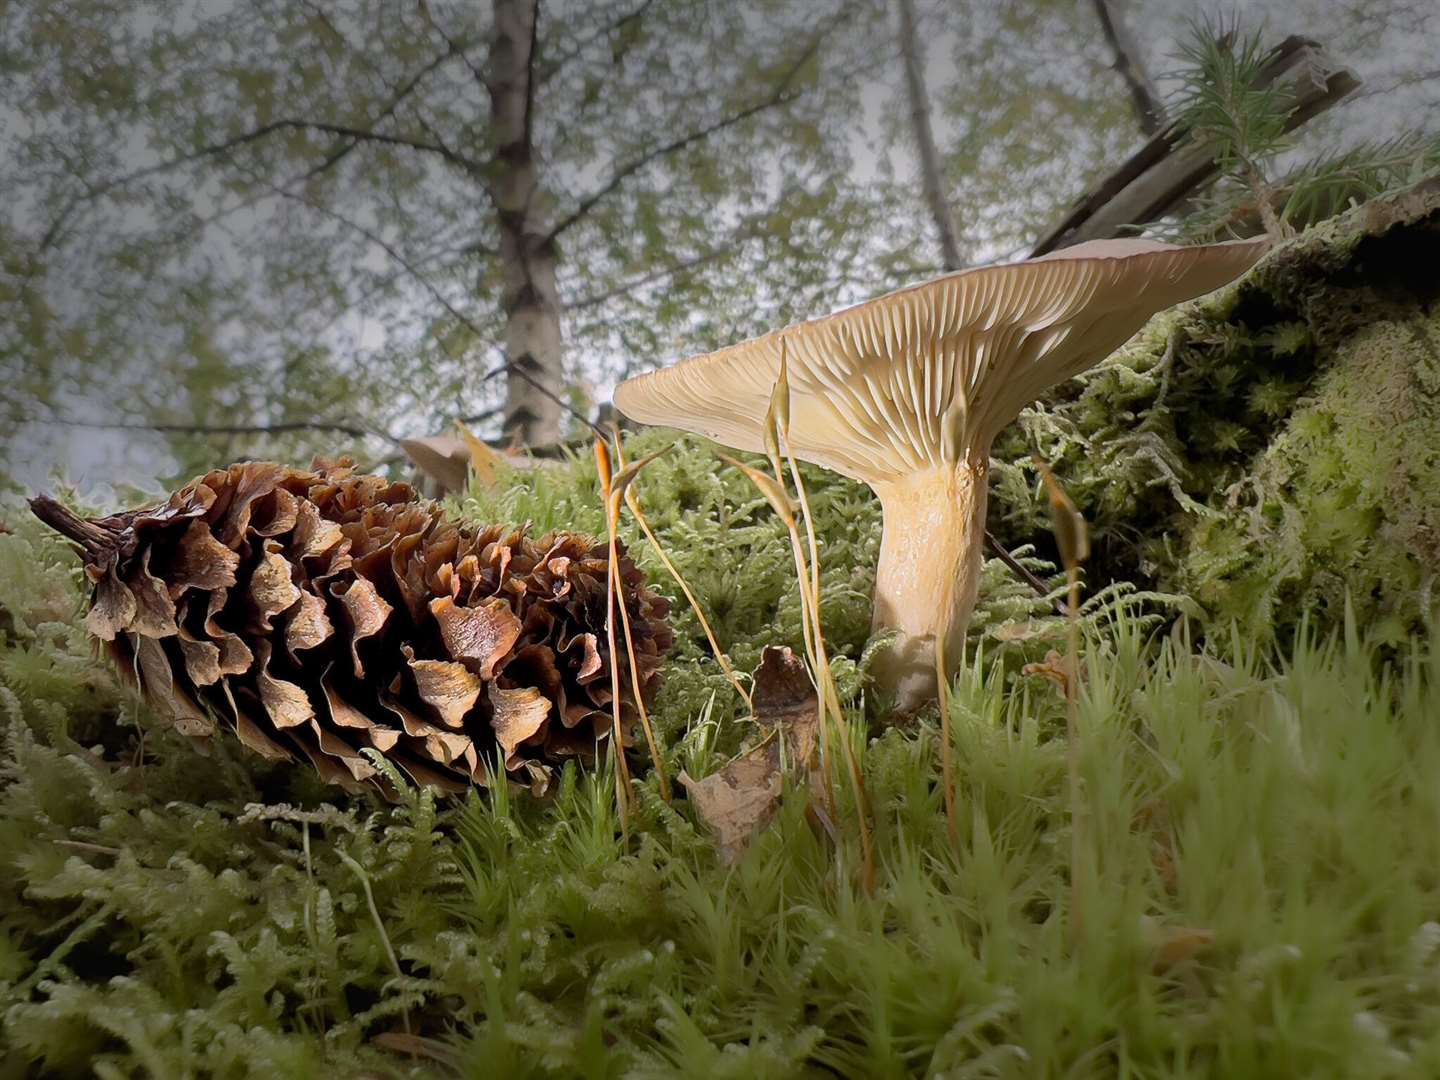 This woodland floor shot "Fungi and Cone" by Pete Binder was highly commended.